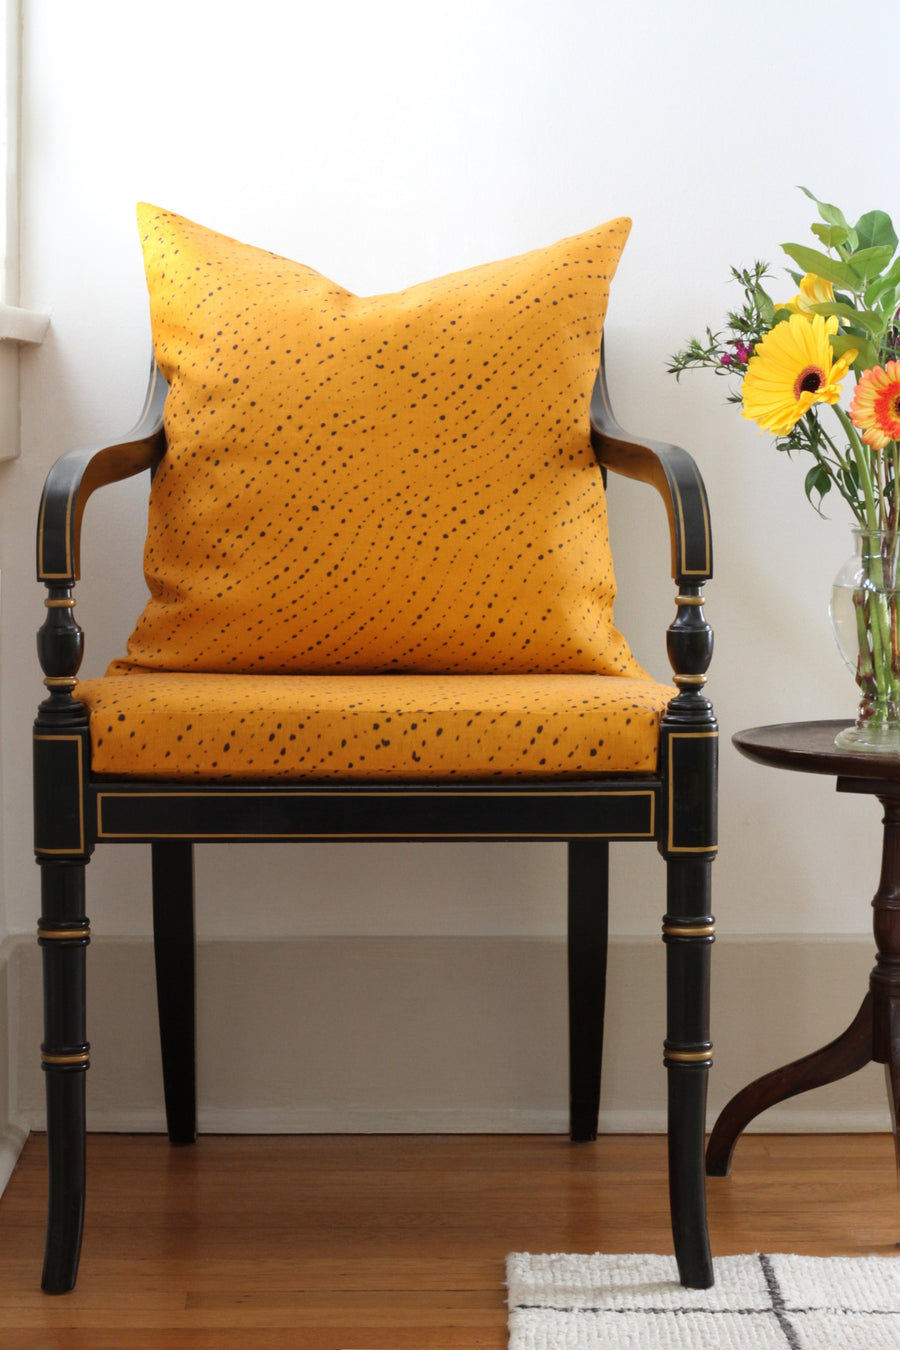 marigold yellow staccato nero shibori upholstery and pillow on a regency chair in fine linen fabric by the yard printed to order in the usa